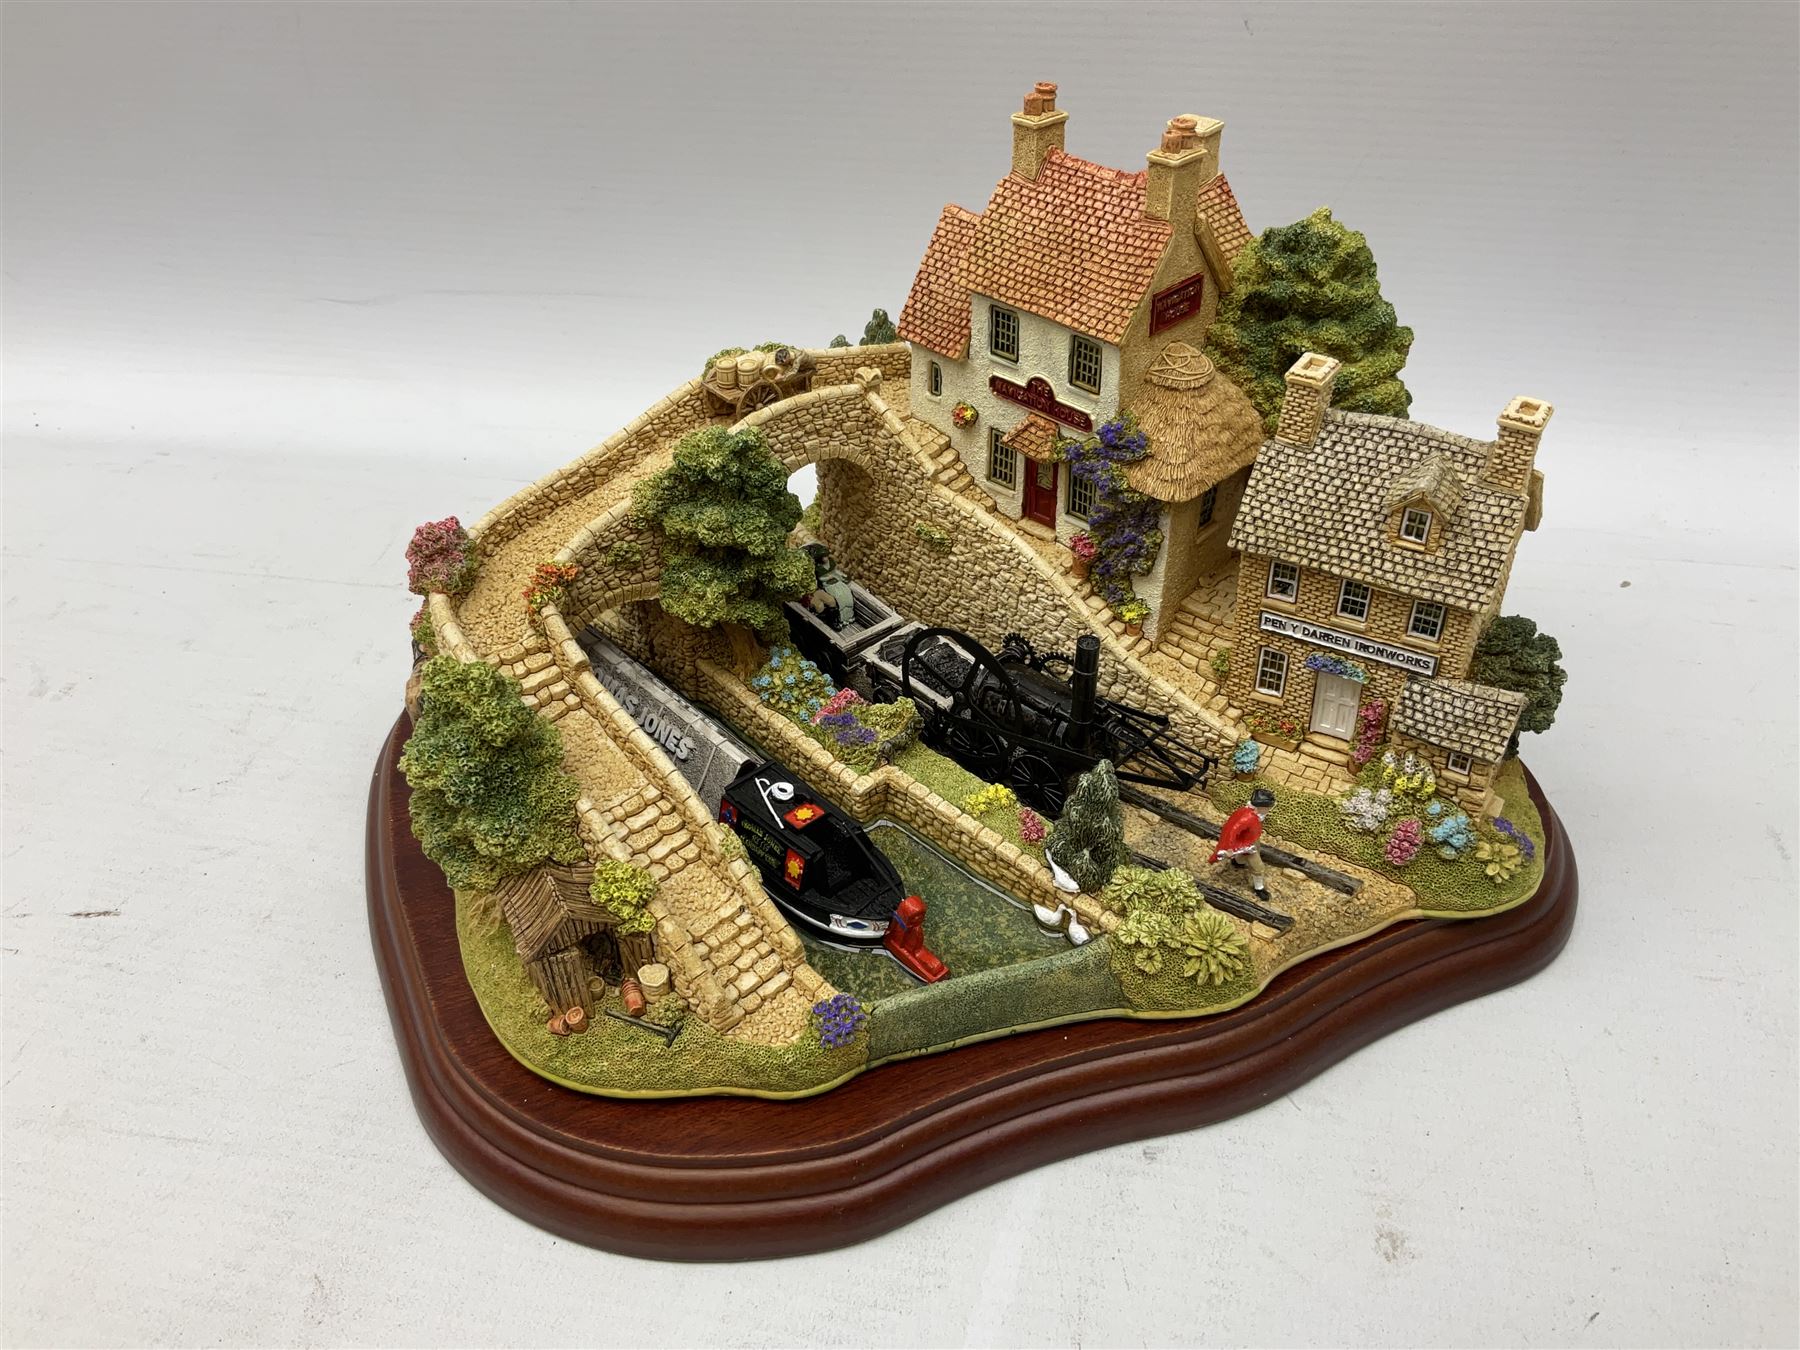 Lilliput Lane models to include 'Age of Steam' locomotives - Image 7 of 9